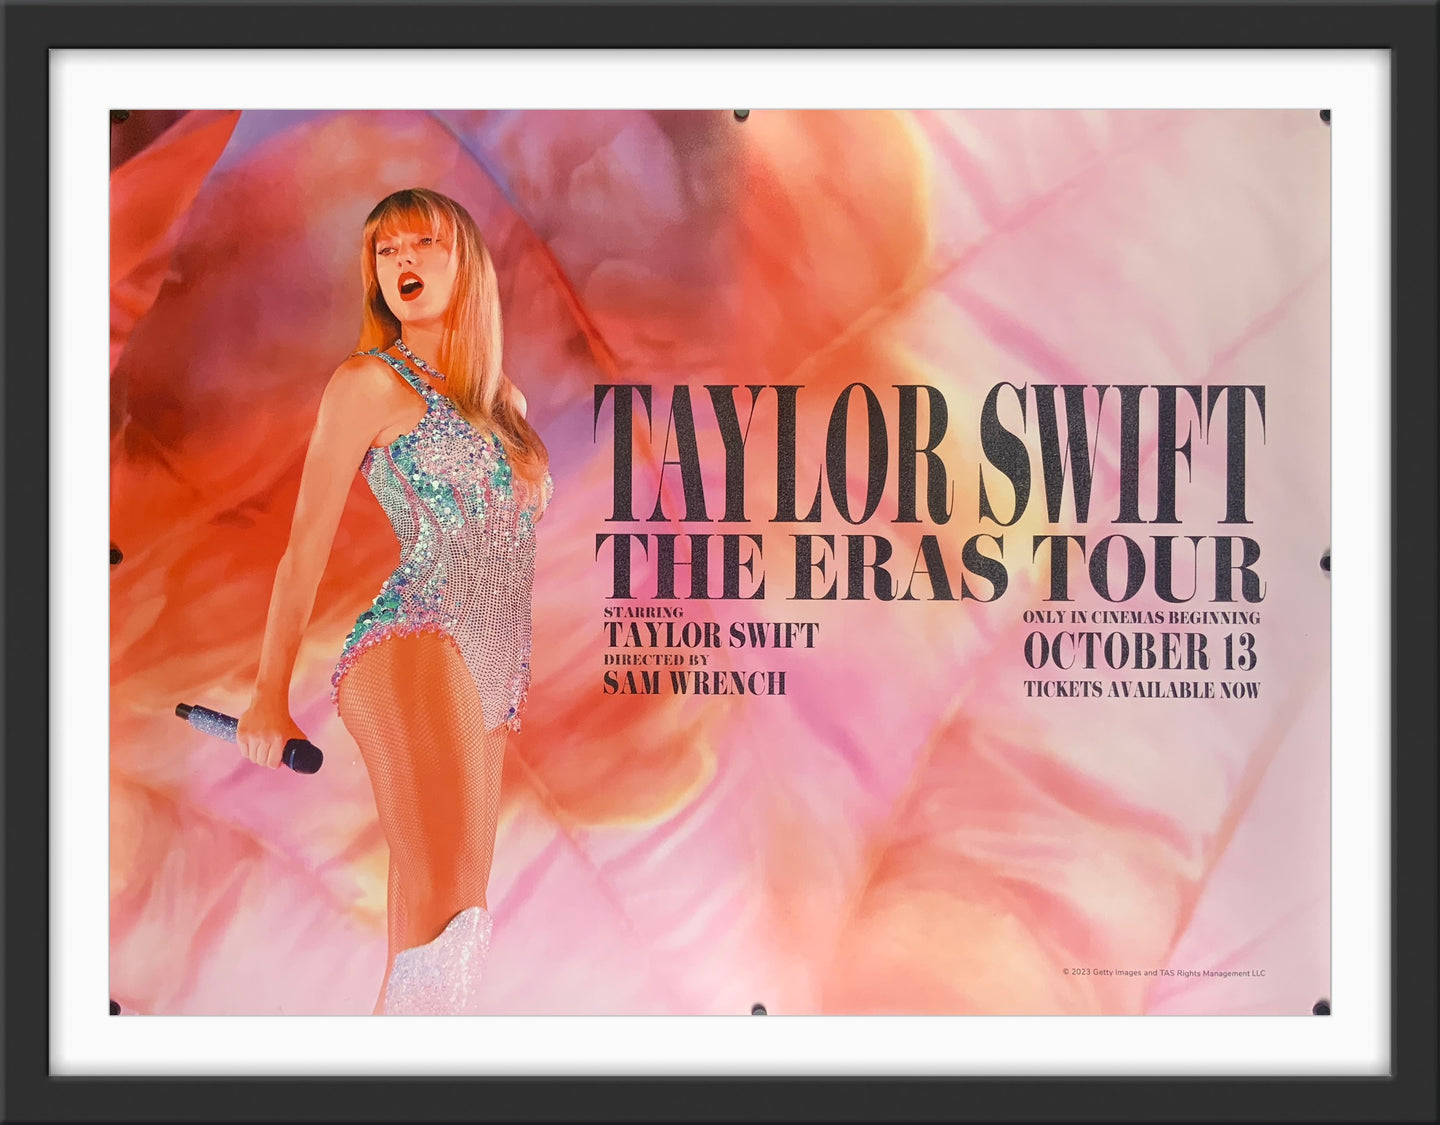 An original movie poster for the film Taylor Swift The Eras Tour